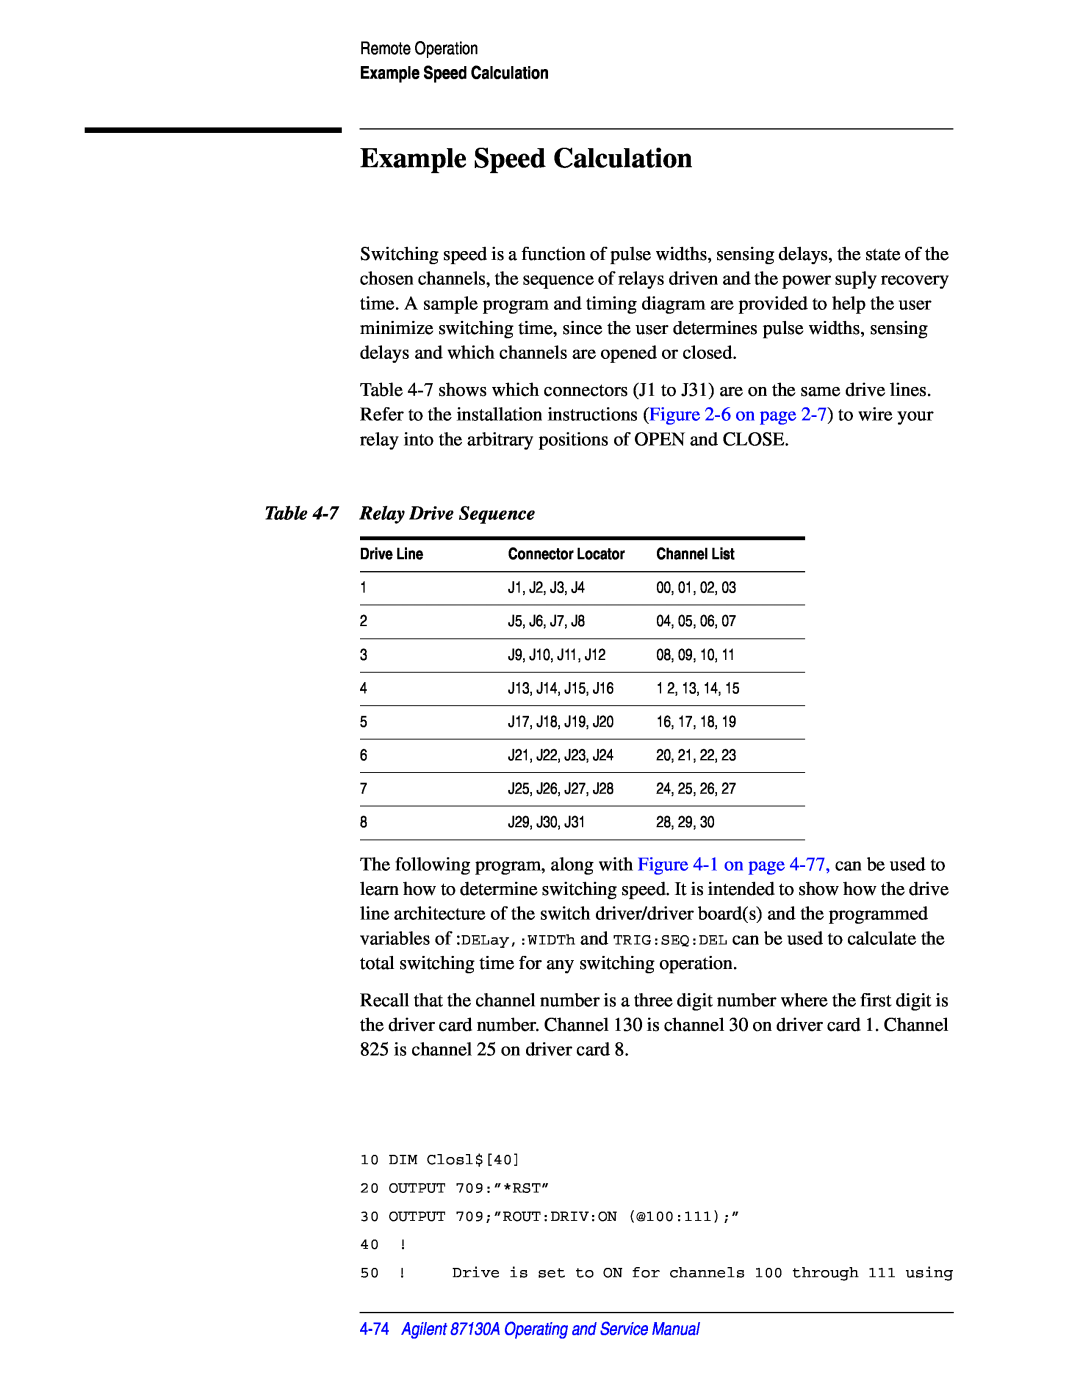 Agilent Technologies 87130A manual Example Speed Calculation, 7 Relay Drive Sequence 